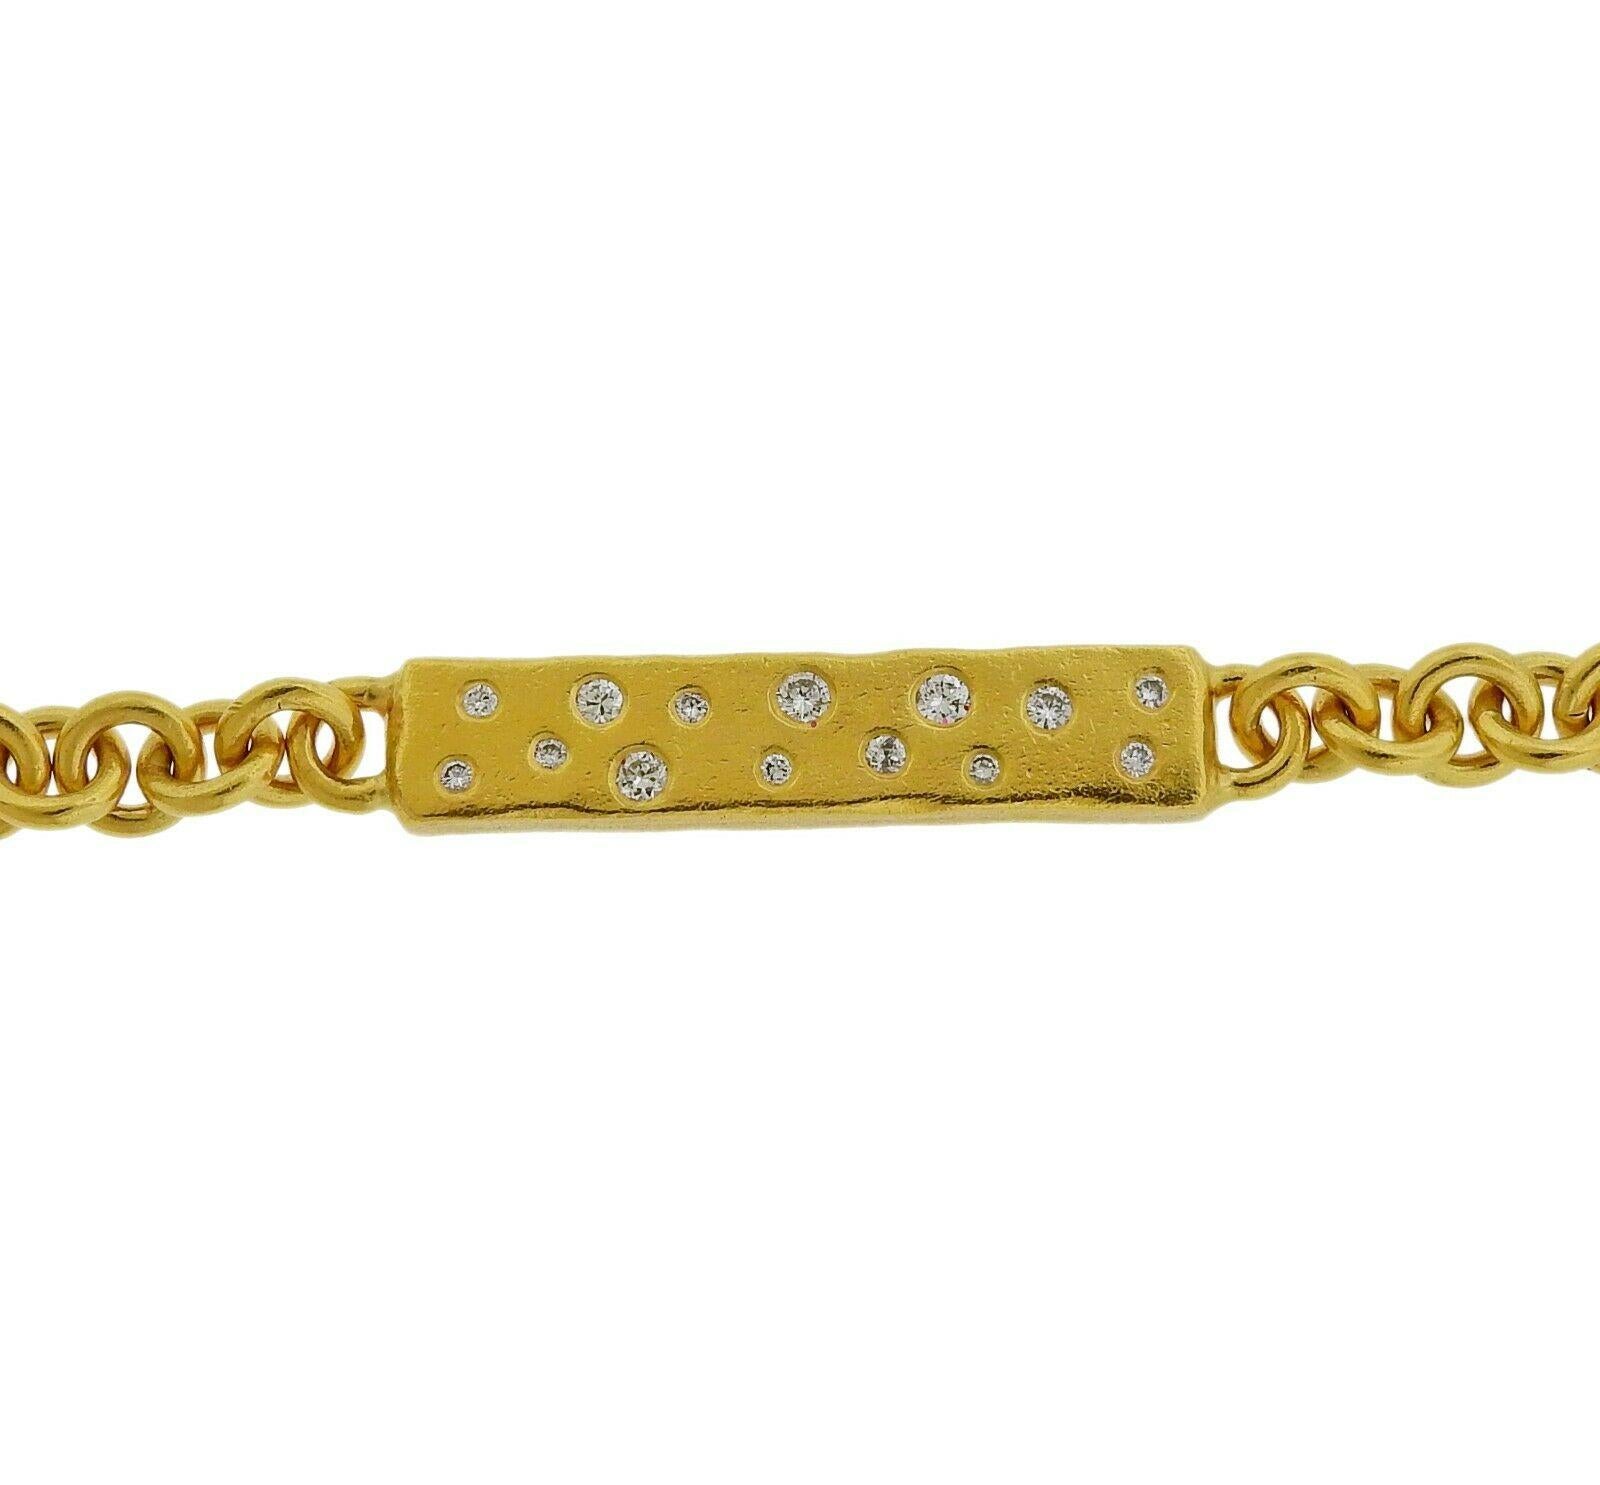 22k yellow gold tag bracelet by Faye Kim, adorned with approx. 1 carat in SI1/H diamonds. Bracelet is 7